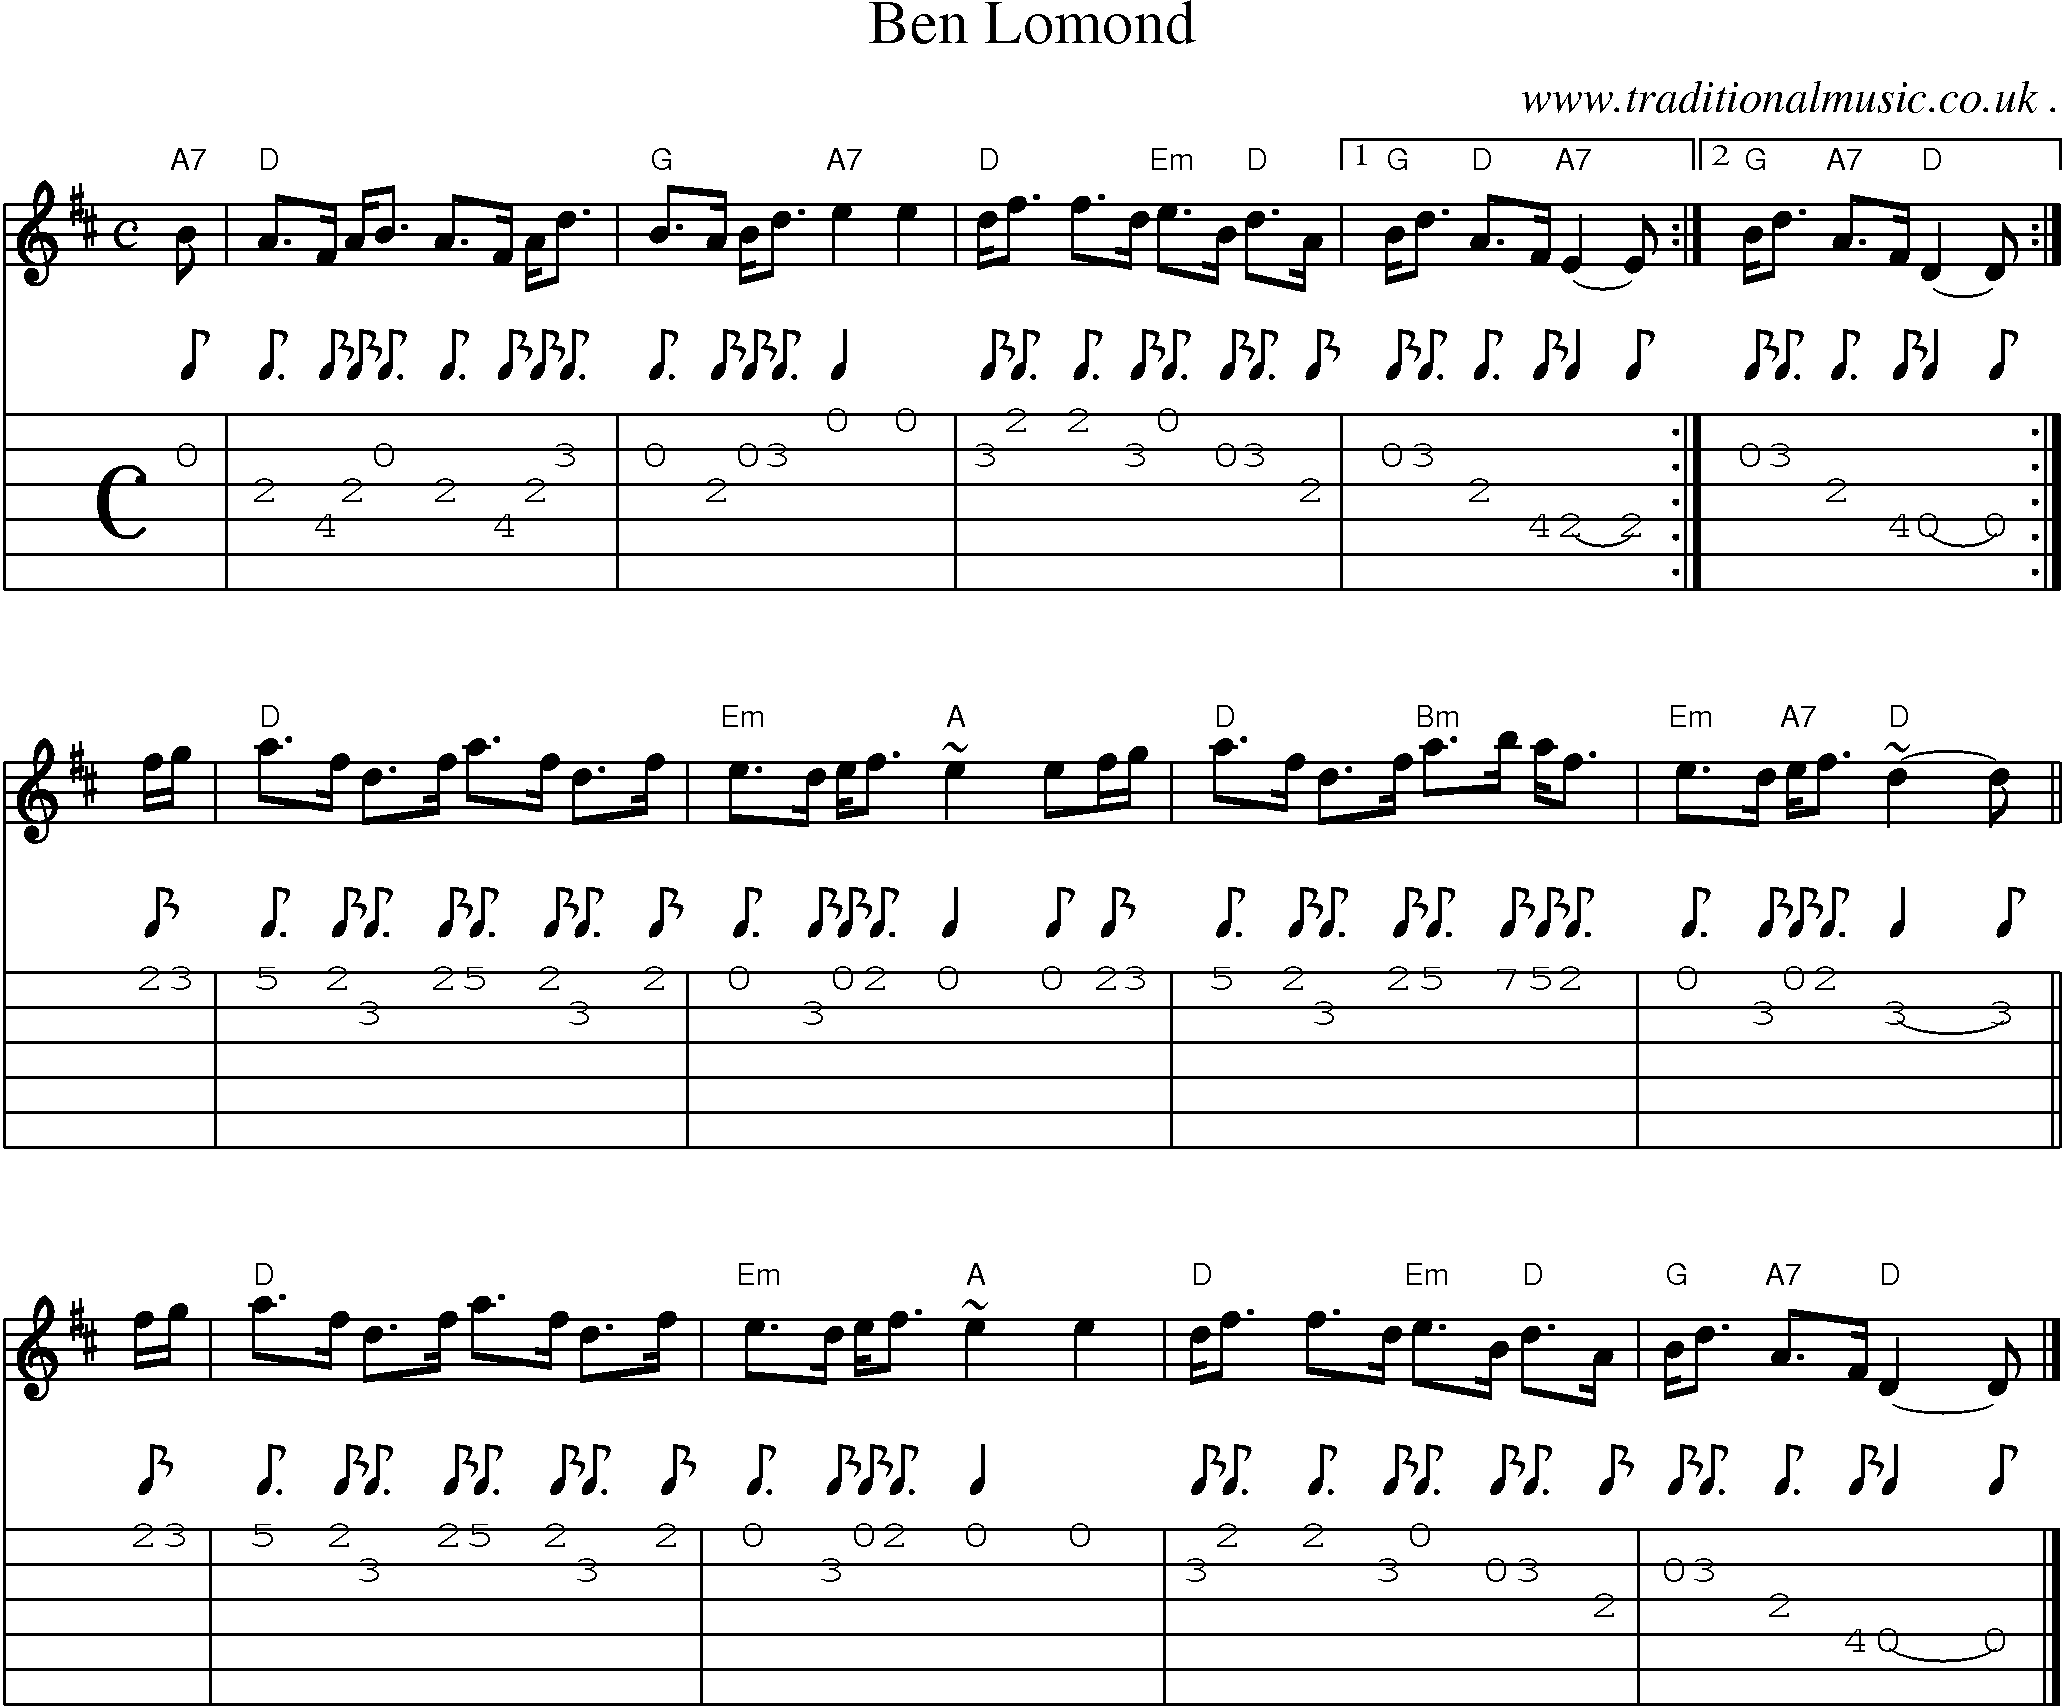 Sheet-music  score, Chords and Guitar Tabs for Ben Lomond